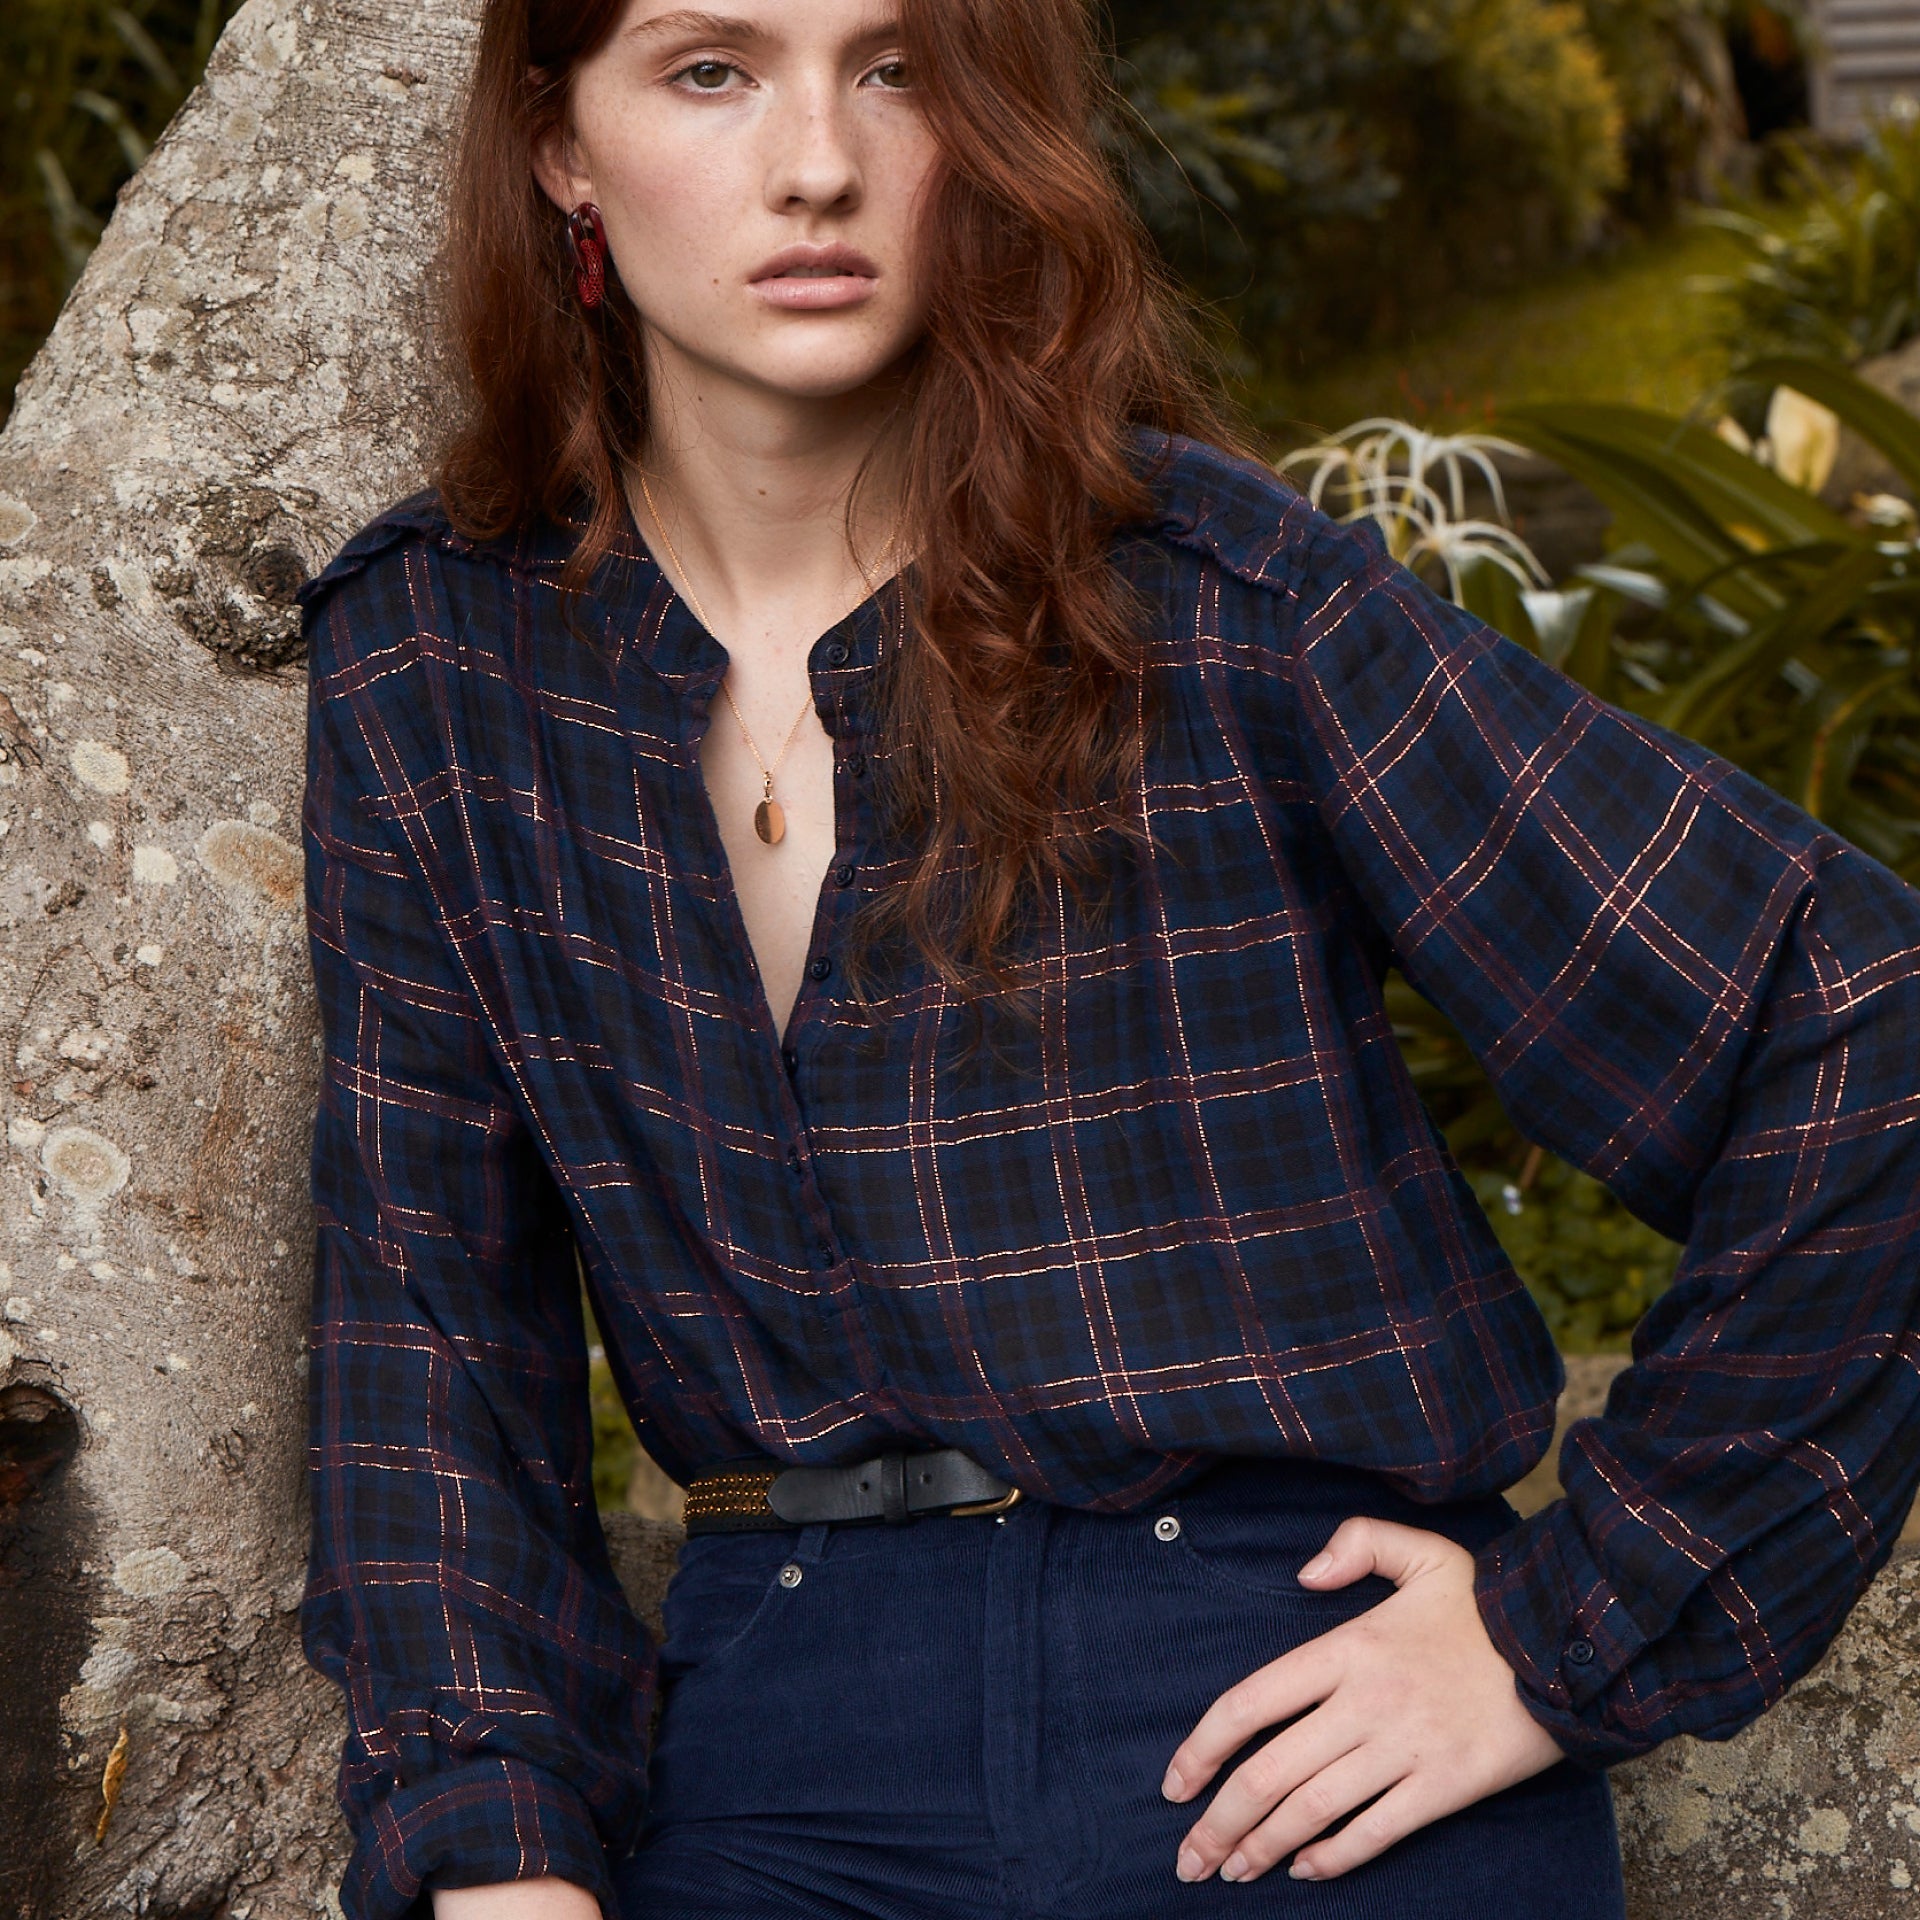 Amelie Blouse With Frill - Plaid lurex